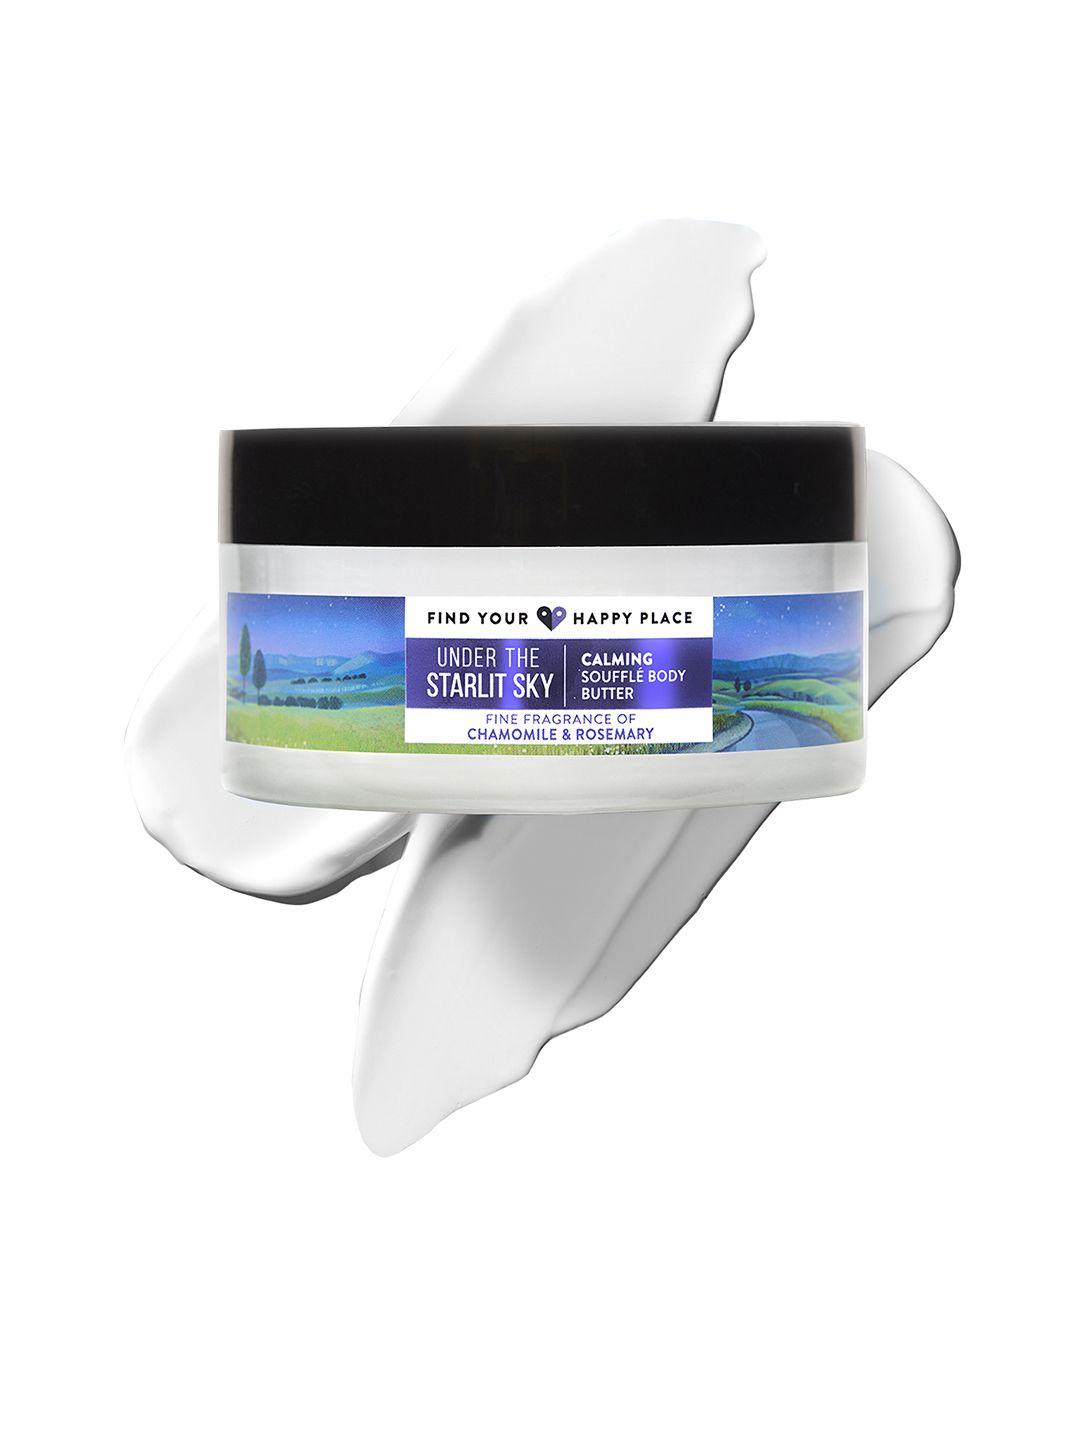 find your happy place under the starlit sky calming souffle body butter - 200g